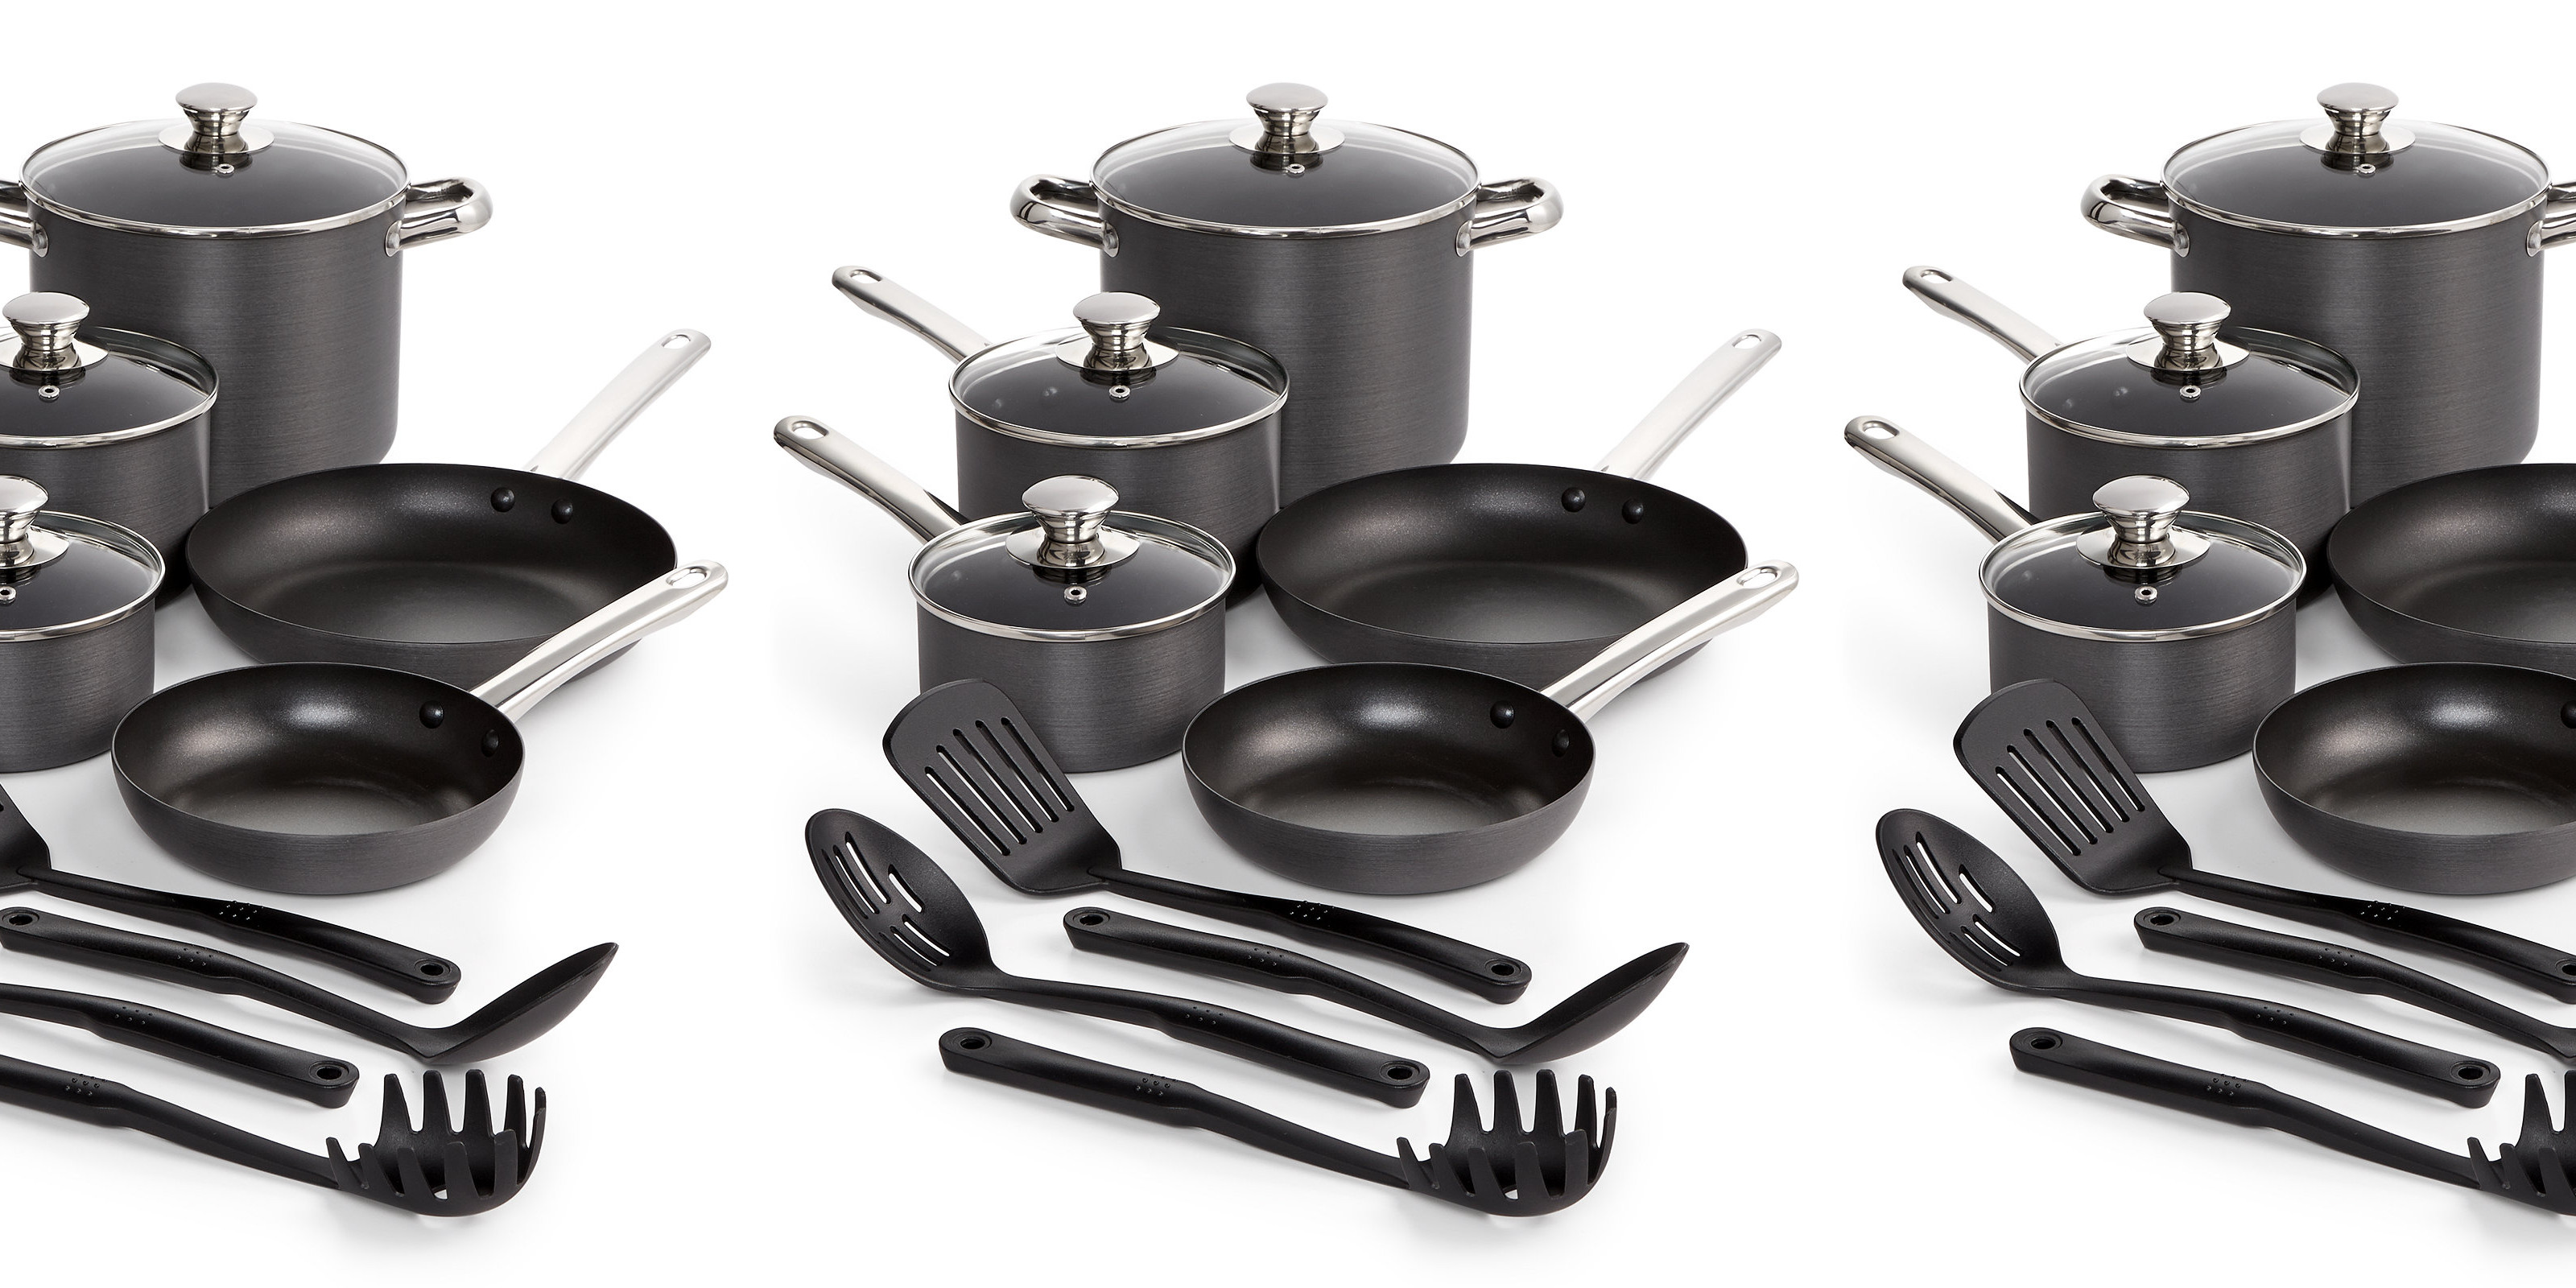 tools-of-the-trade-stainless-steel-trimmed-hard-anodized-12-piece-nonstick-cookware-set